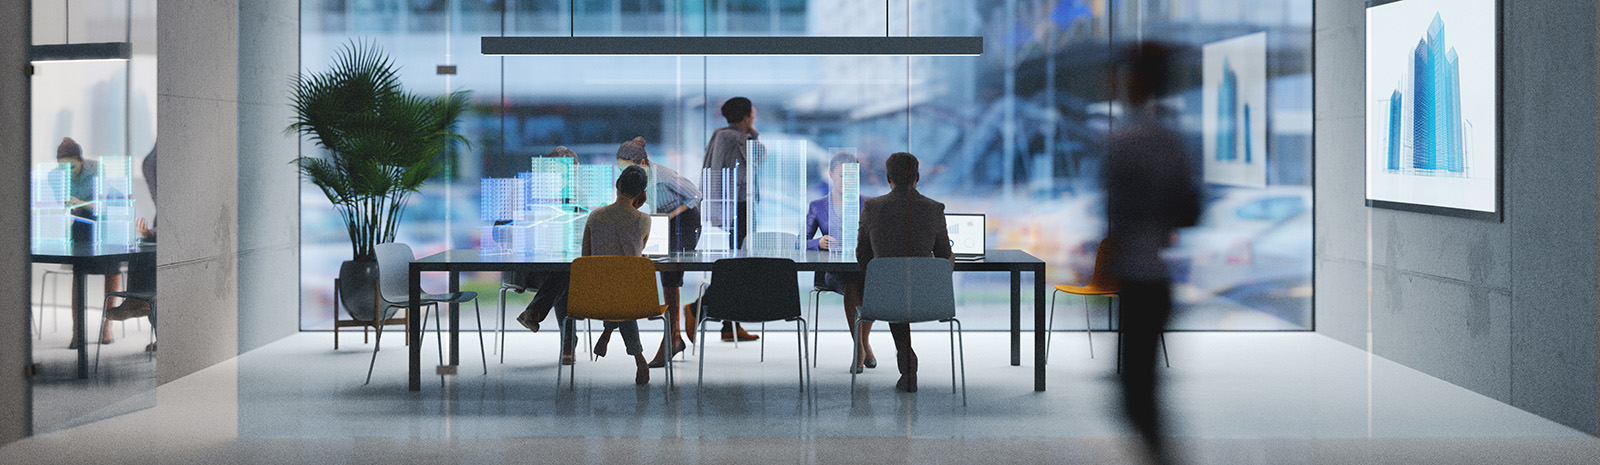 IMAGE: Wide view into glass conference room. Blurred figure walking in foreground.